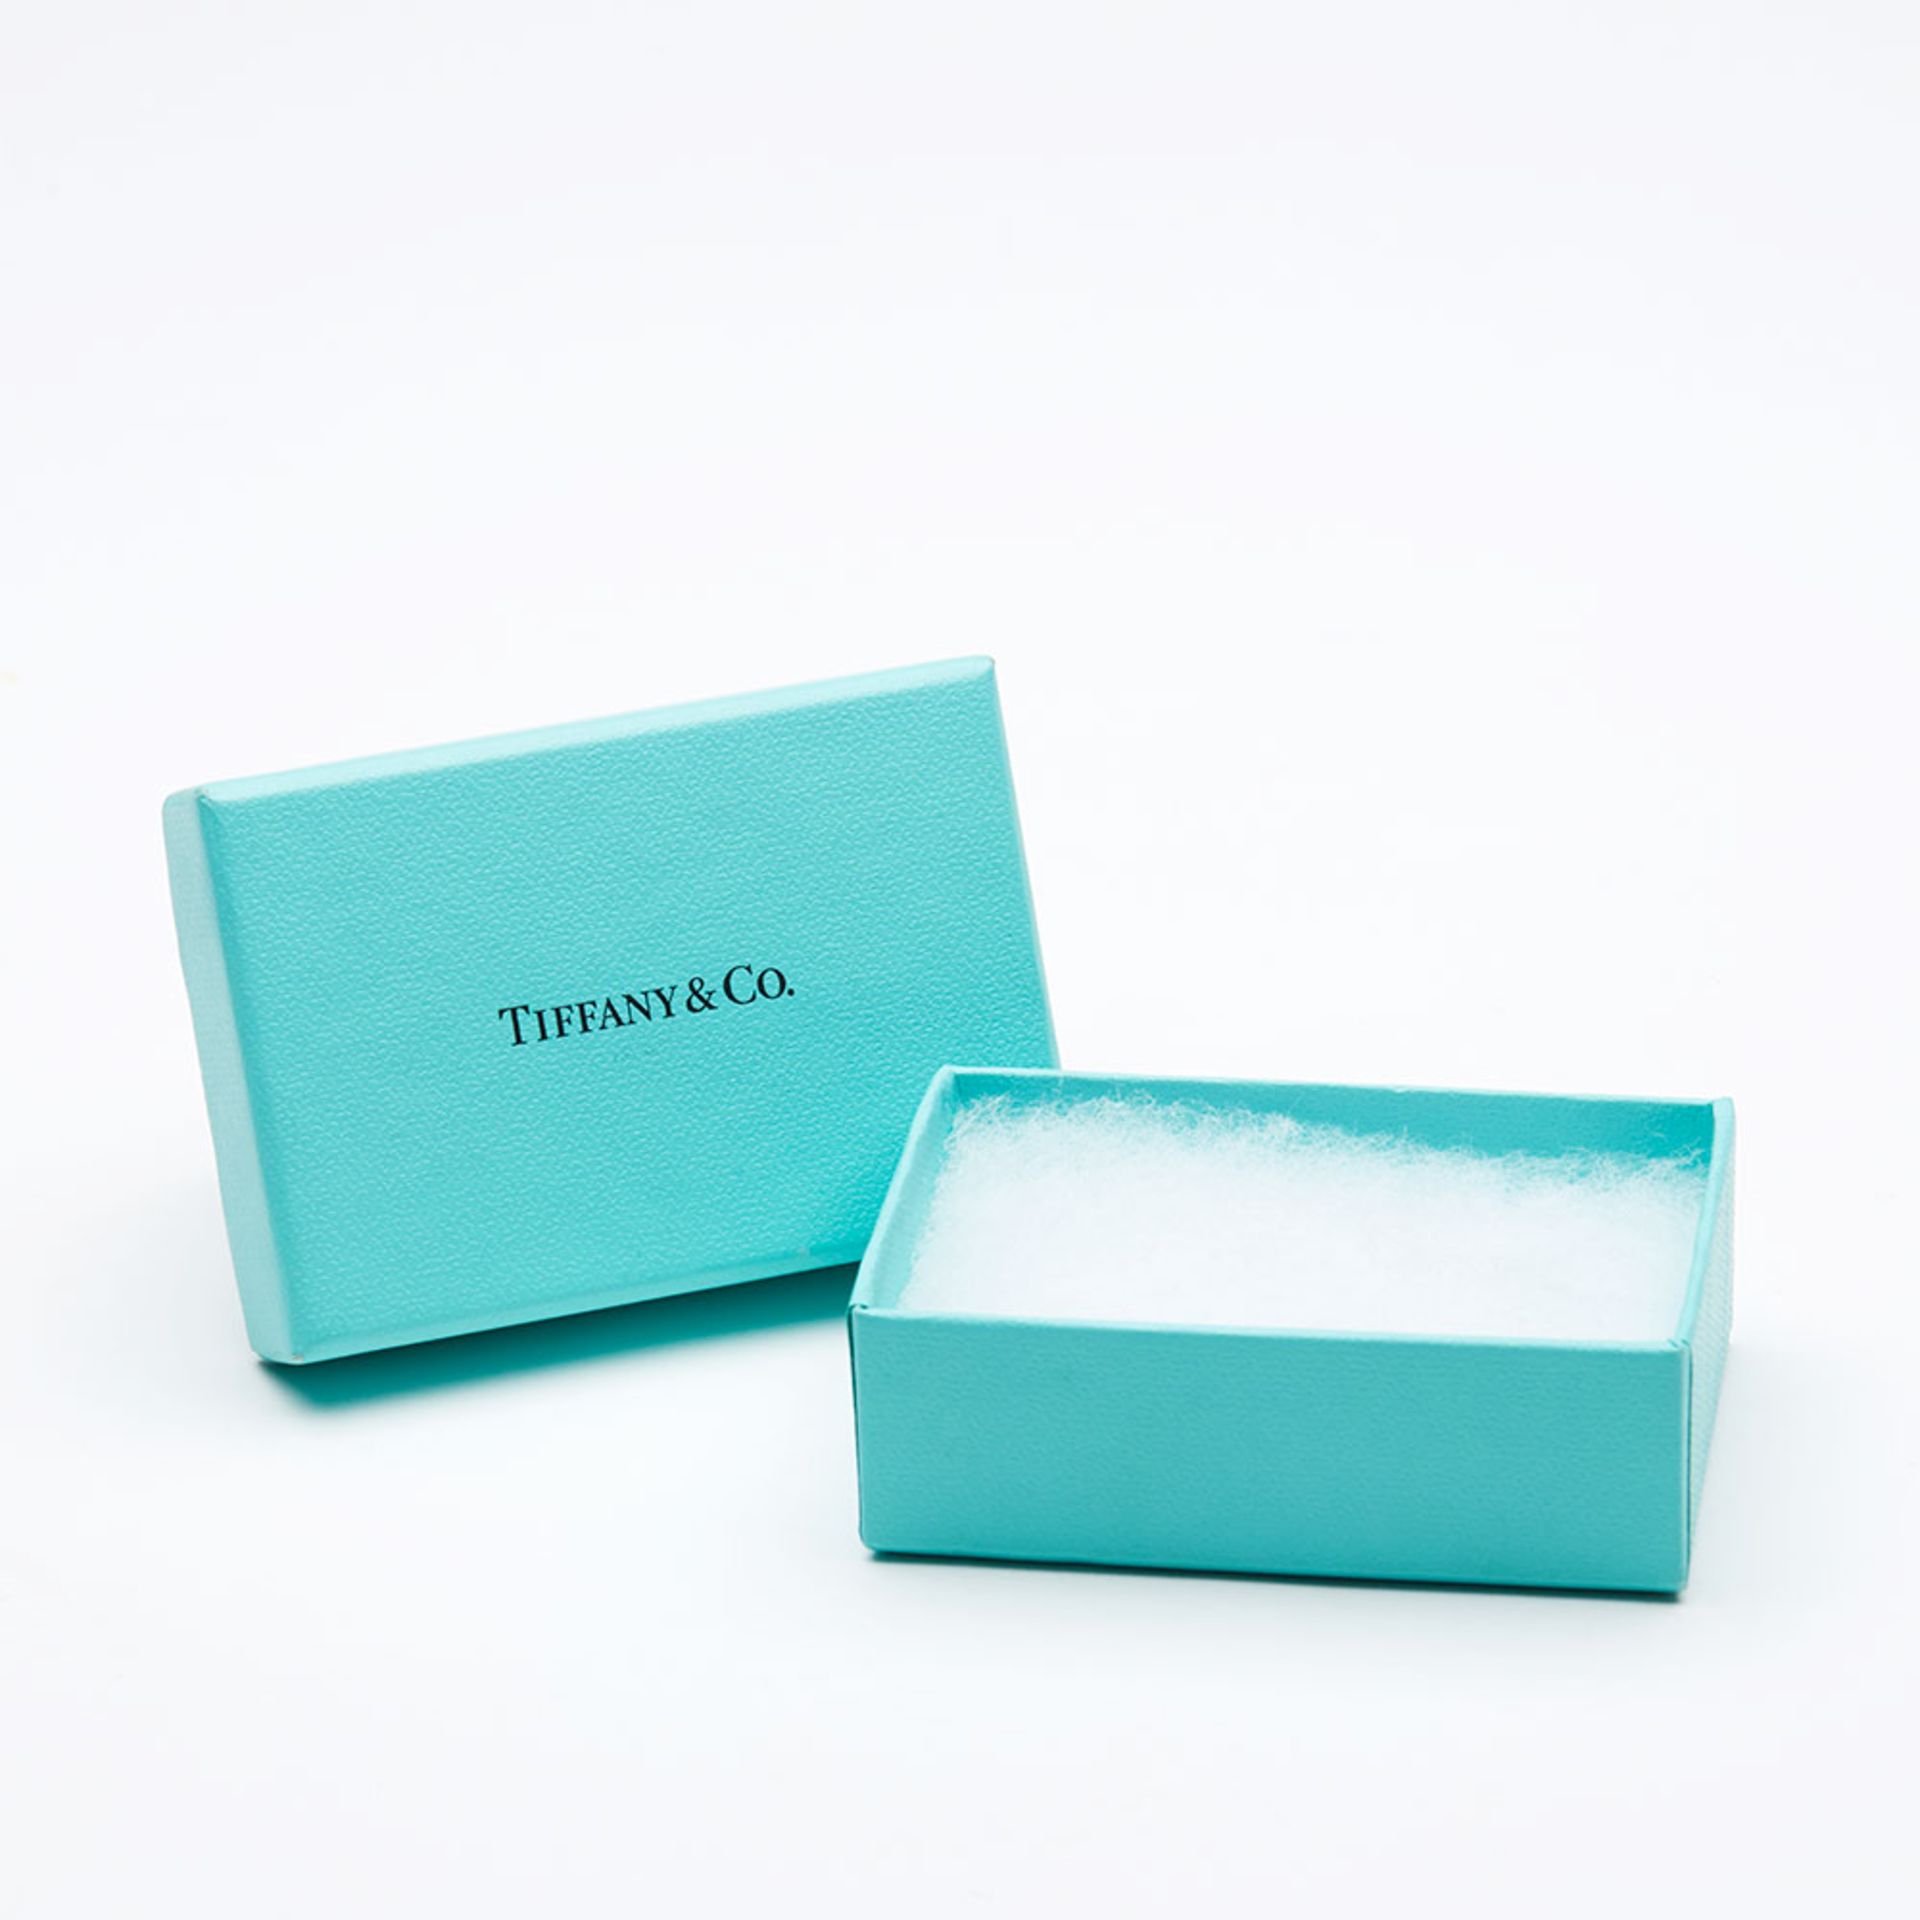 Tiffany & Co. Palladium 2.70ct Round, Marquise & Baguette Cut Diamond Stud Earrings with T&Co Box - Image 9 of 9